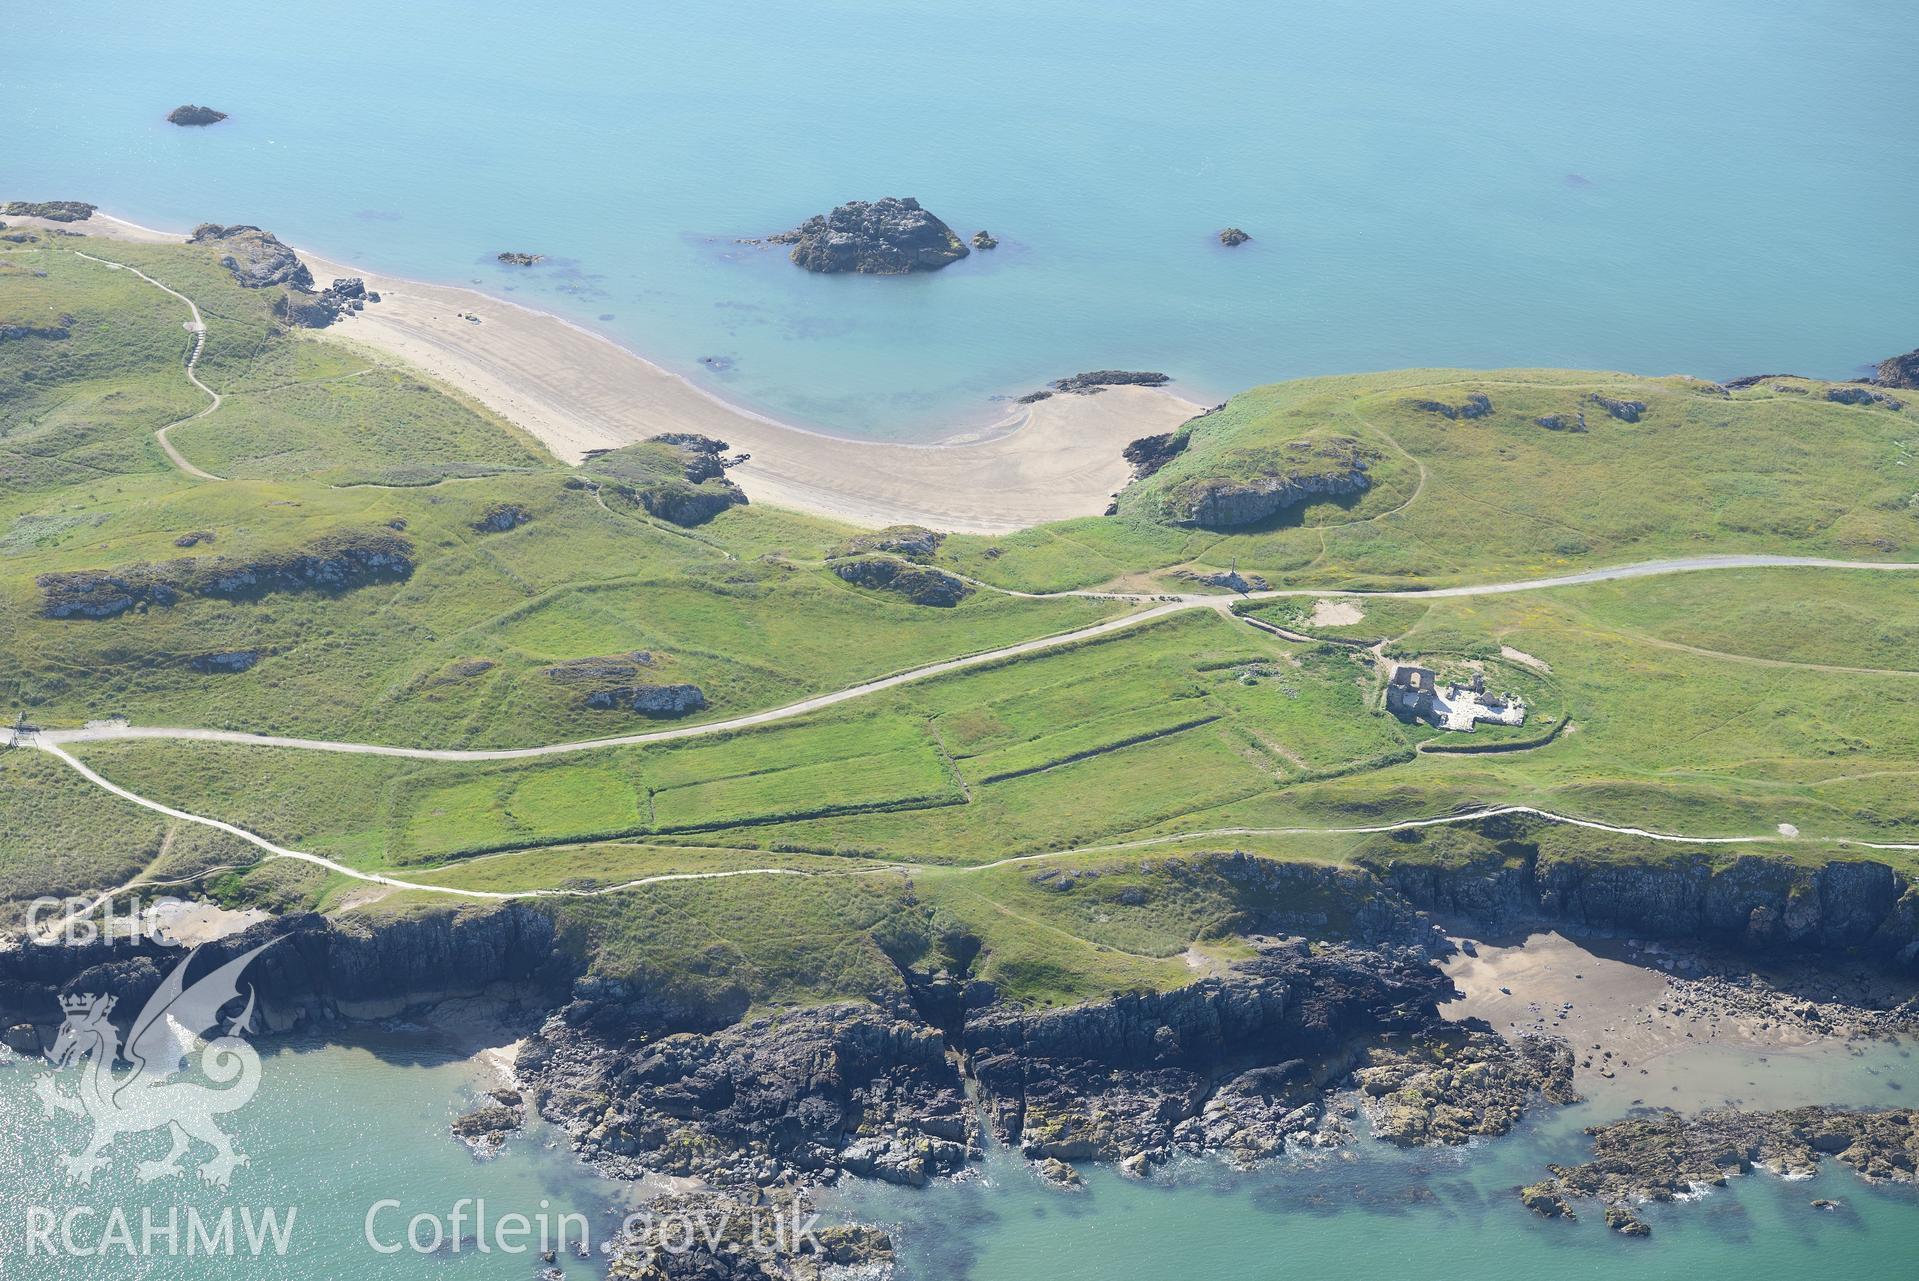 Remains of St. Dwynwen's church, Llanddwyn Island. Oblique aerial photograph taken during the Royal Commission's programme of archaeological aerial reconnaissance by Toby Driver on 23rd June 2015.